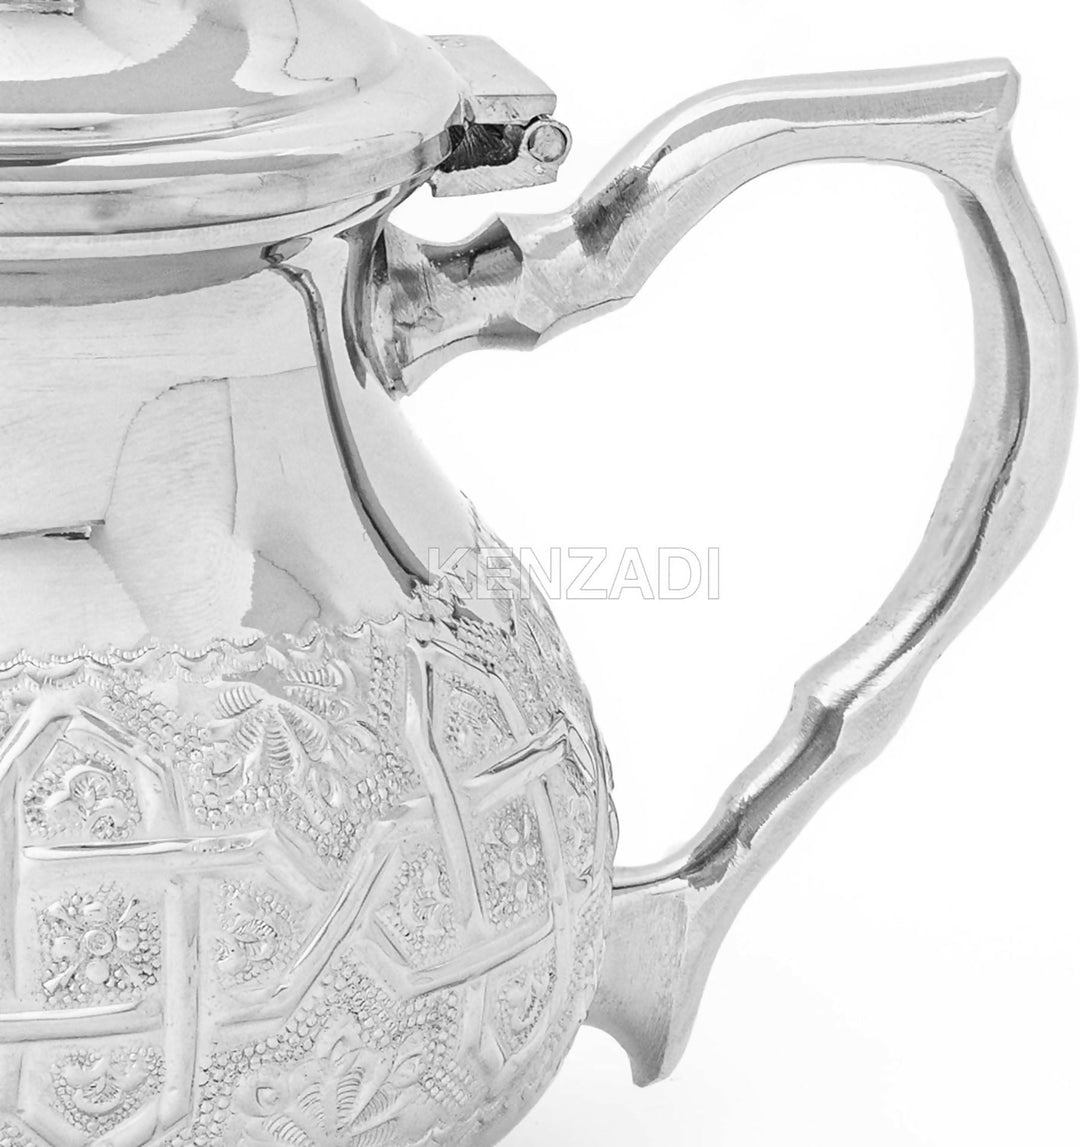 Moroccan Serving TeaPot Handmade Of Brass Silver Plated Hand Carved In Fes Morocco (8 Oz without Legs)